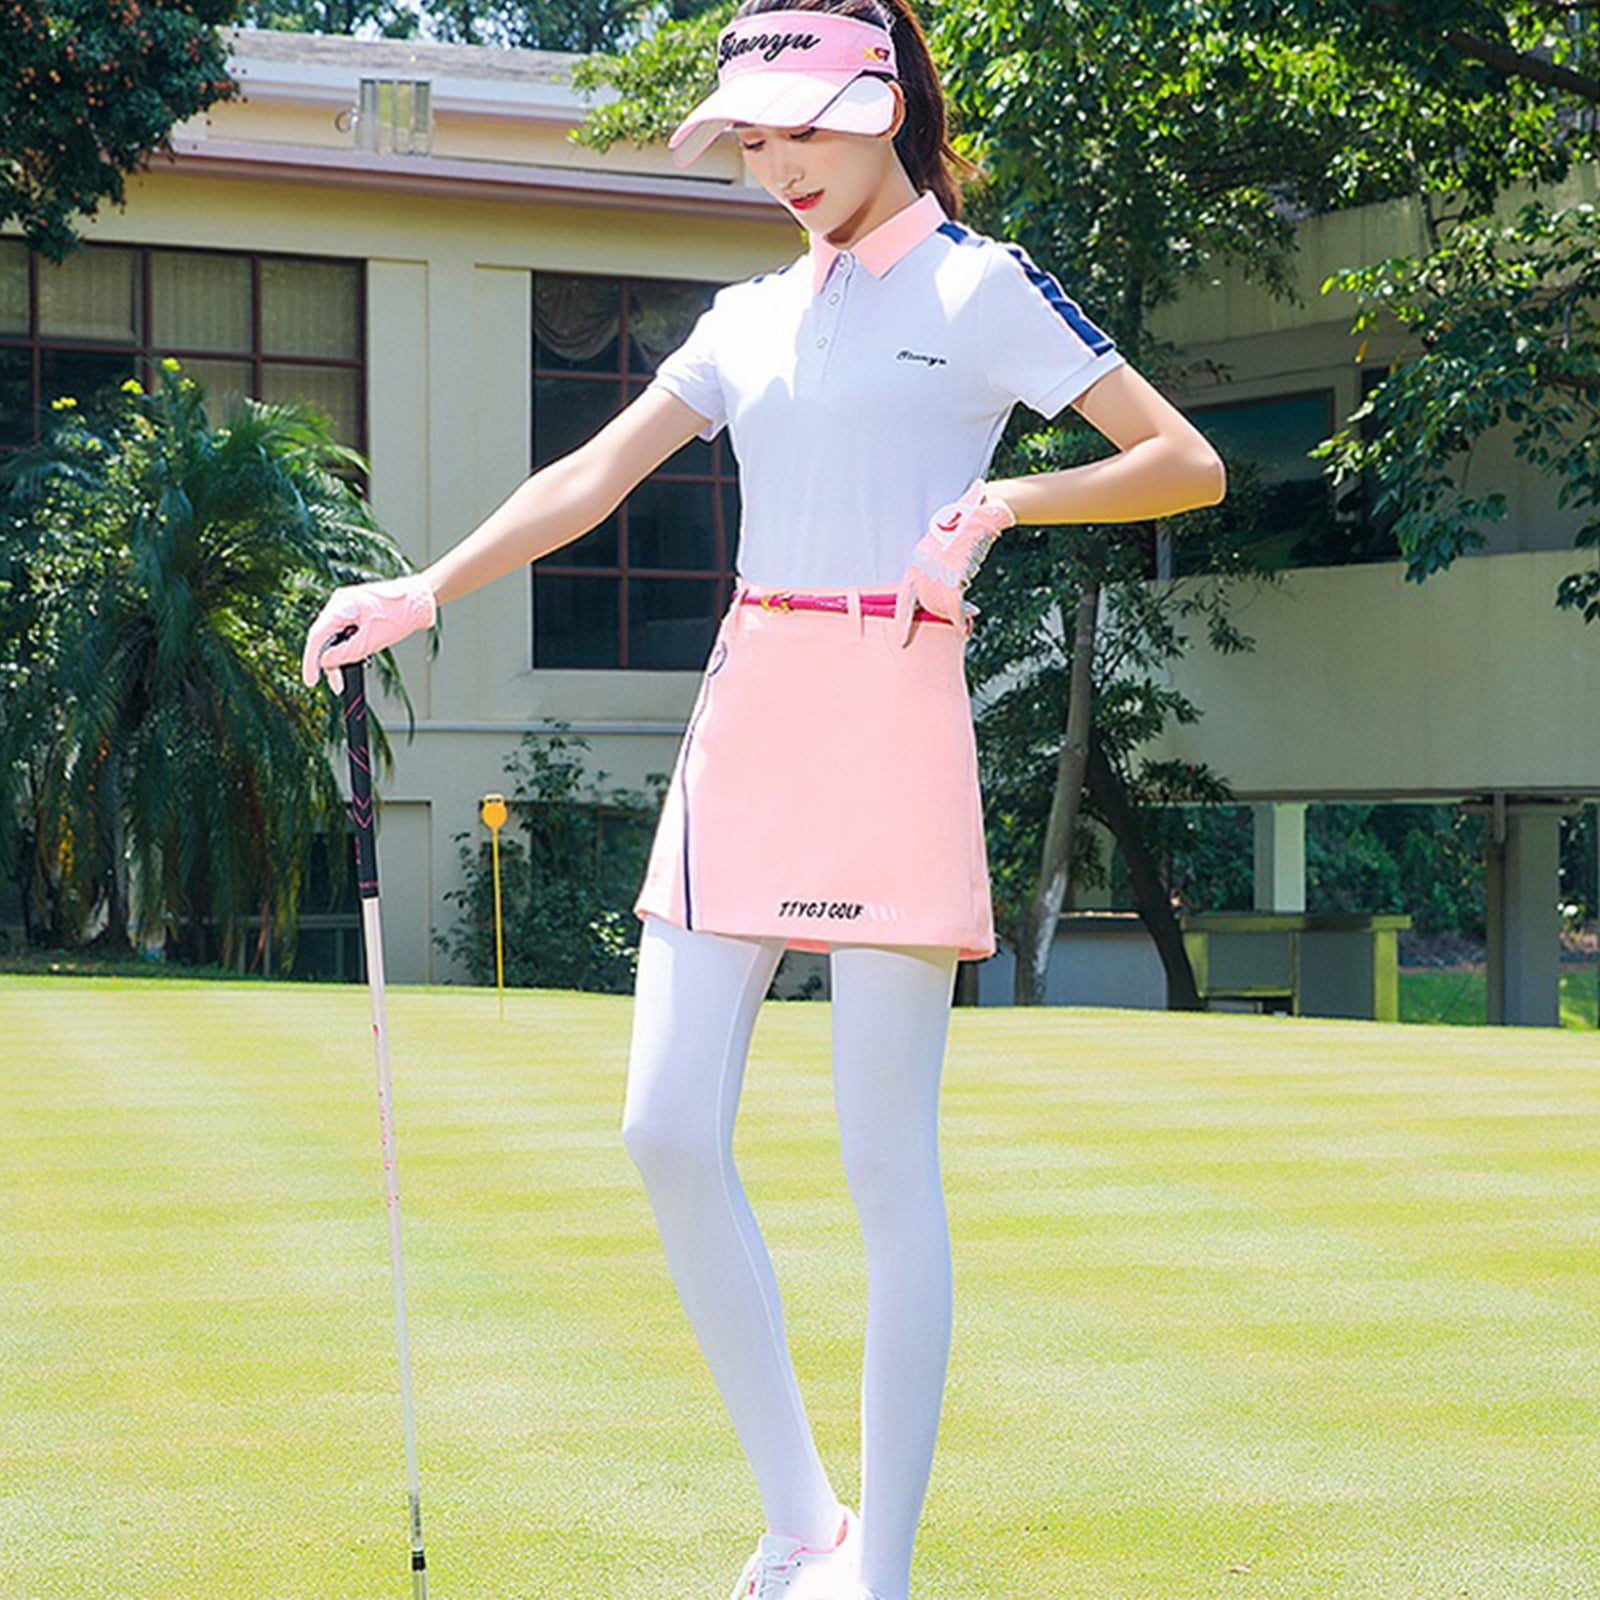 Jeyiour 3 Pairs Women Golf Sun Protection Stockings Cooling Golf